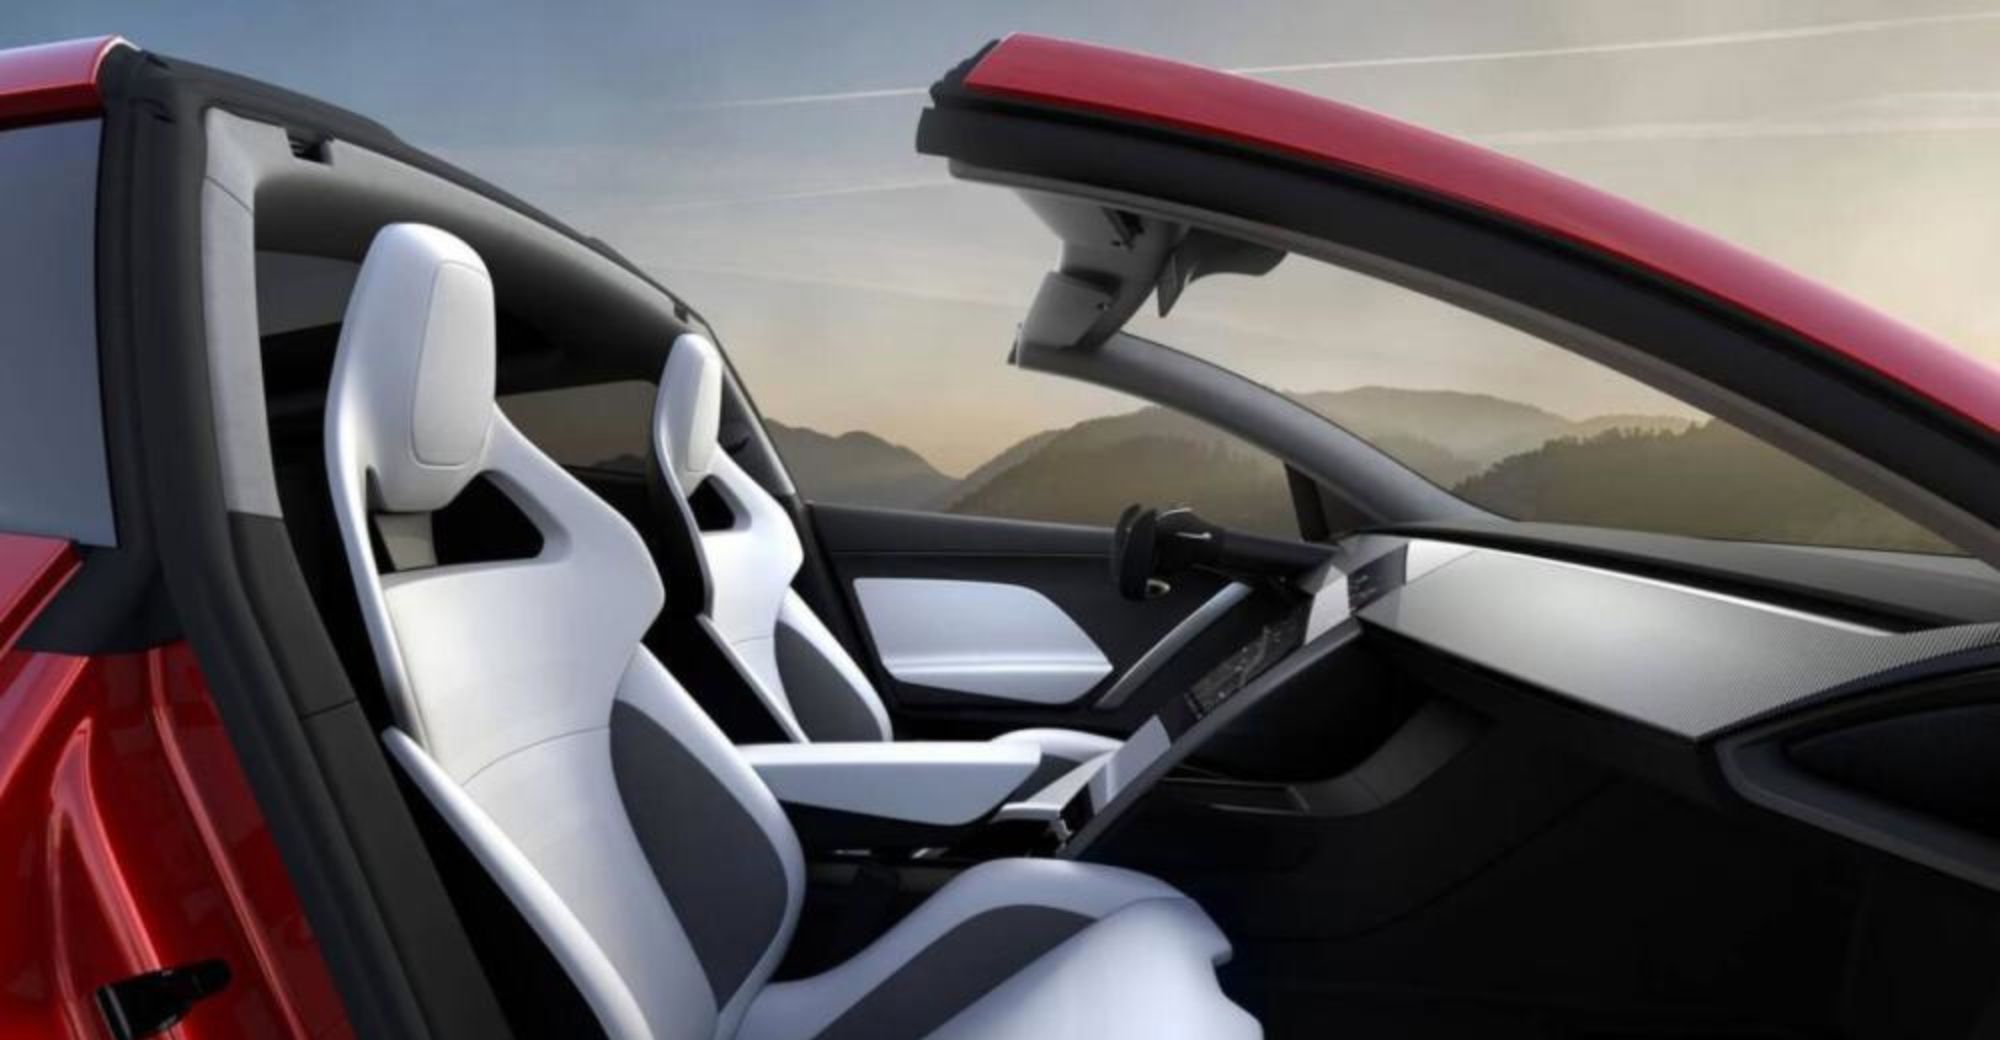 Tesla Roadster Pure Electric Sports Vehicle Has Again Open Reservations in China